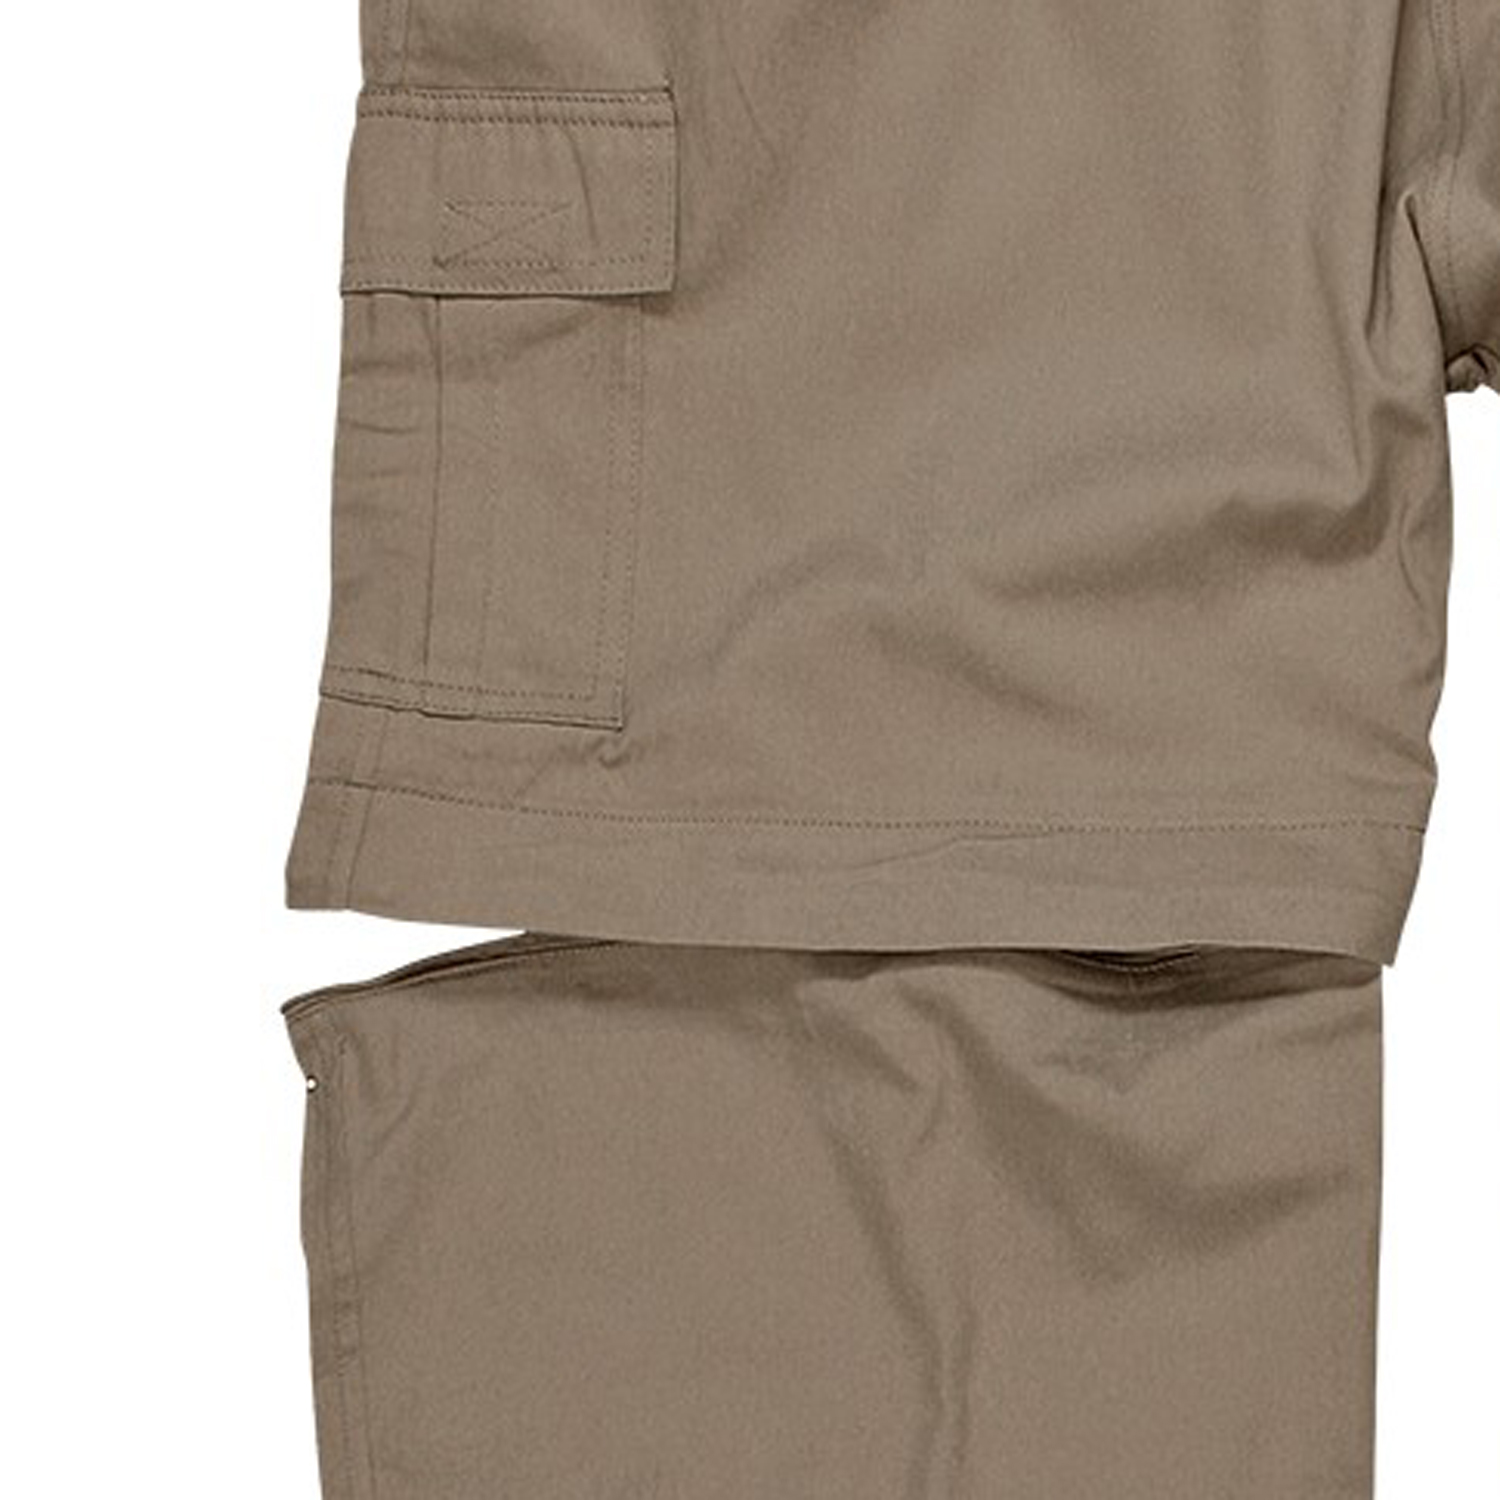 Khaki zip-off-trousers from Abraxas in oversizes until 10XL